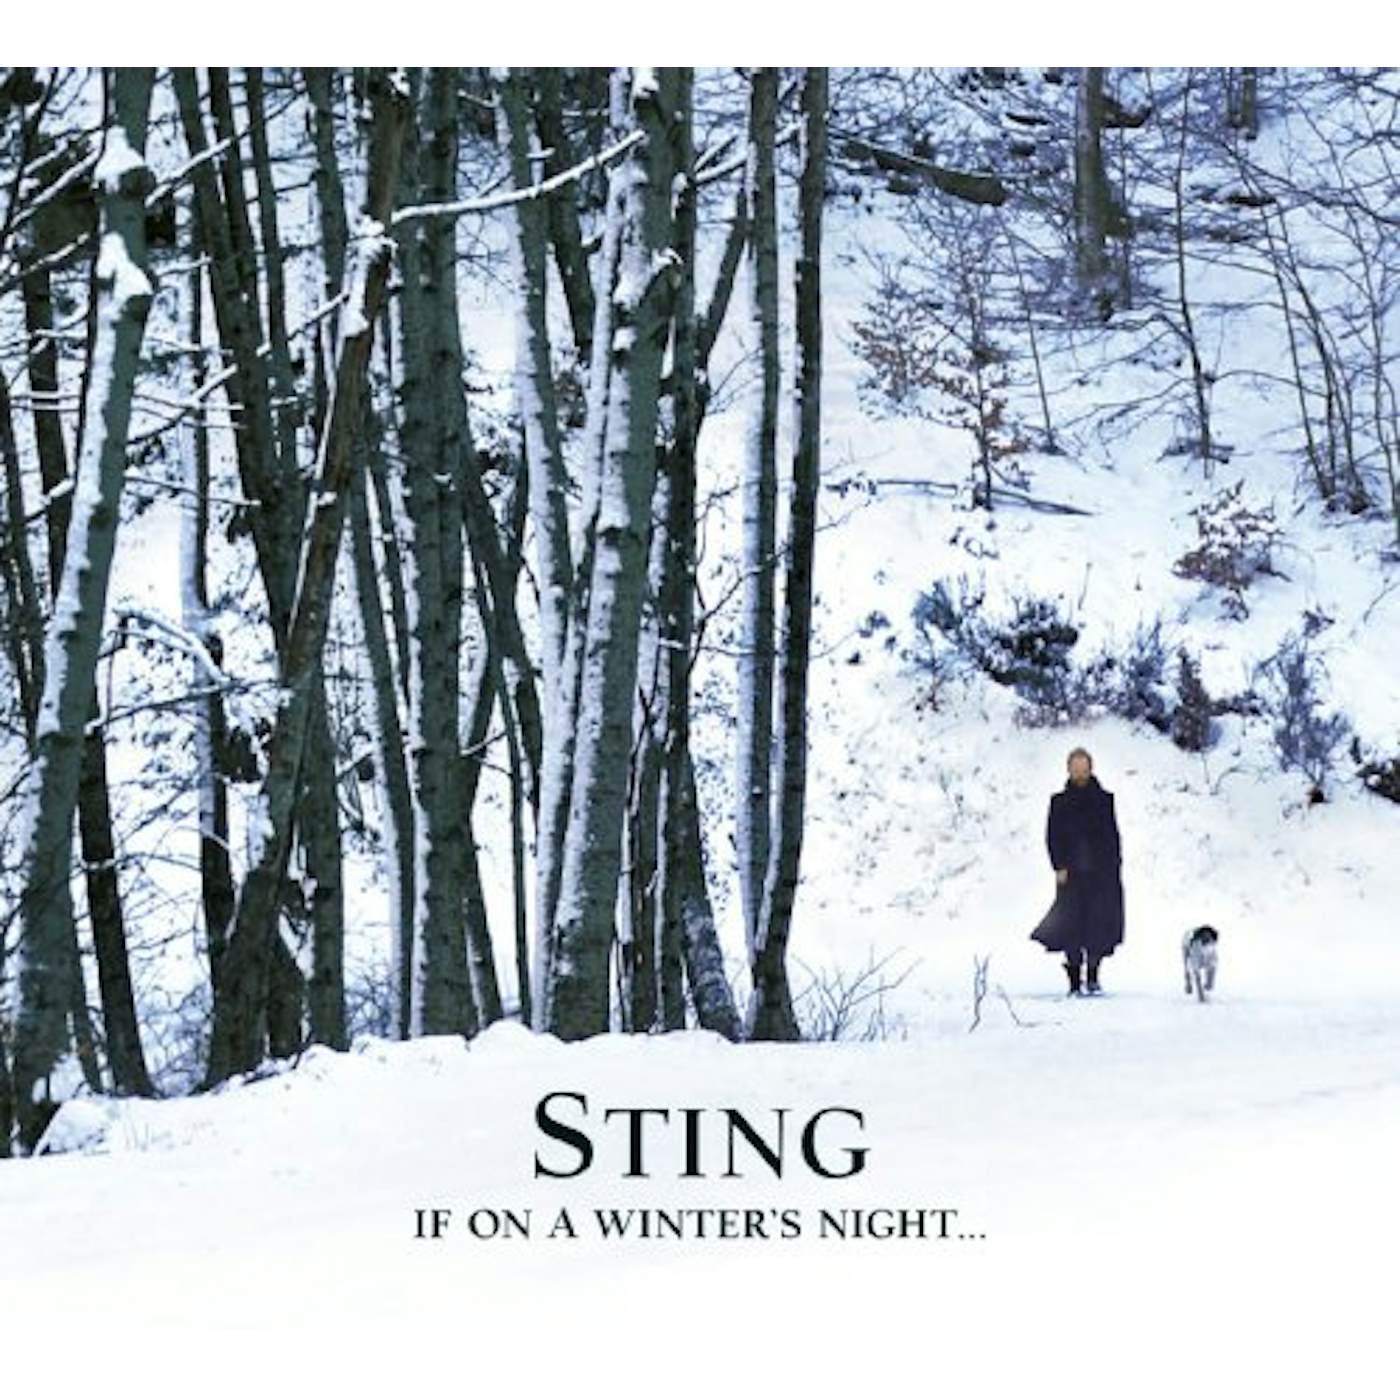 Sting IF ON A WINTER'S NIGHT CD